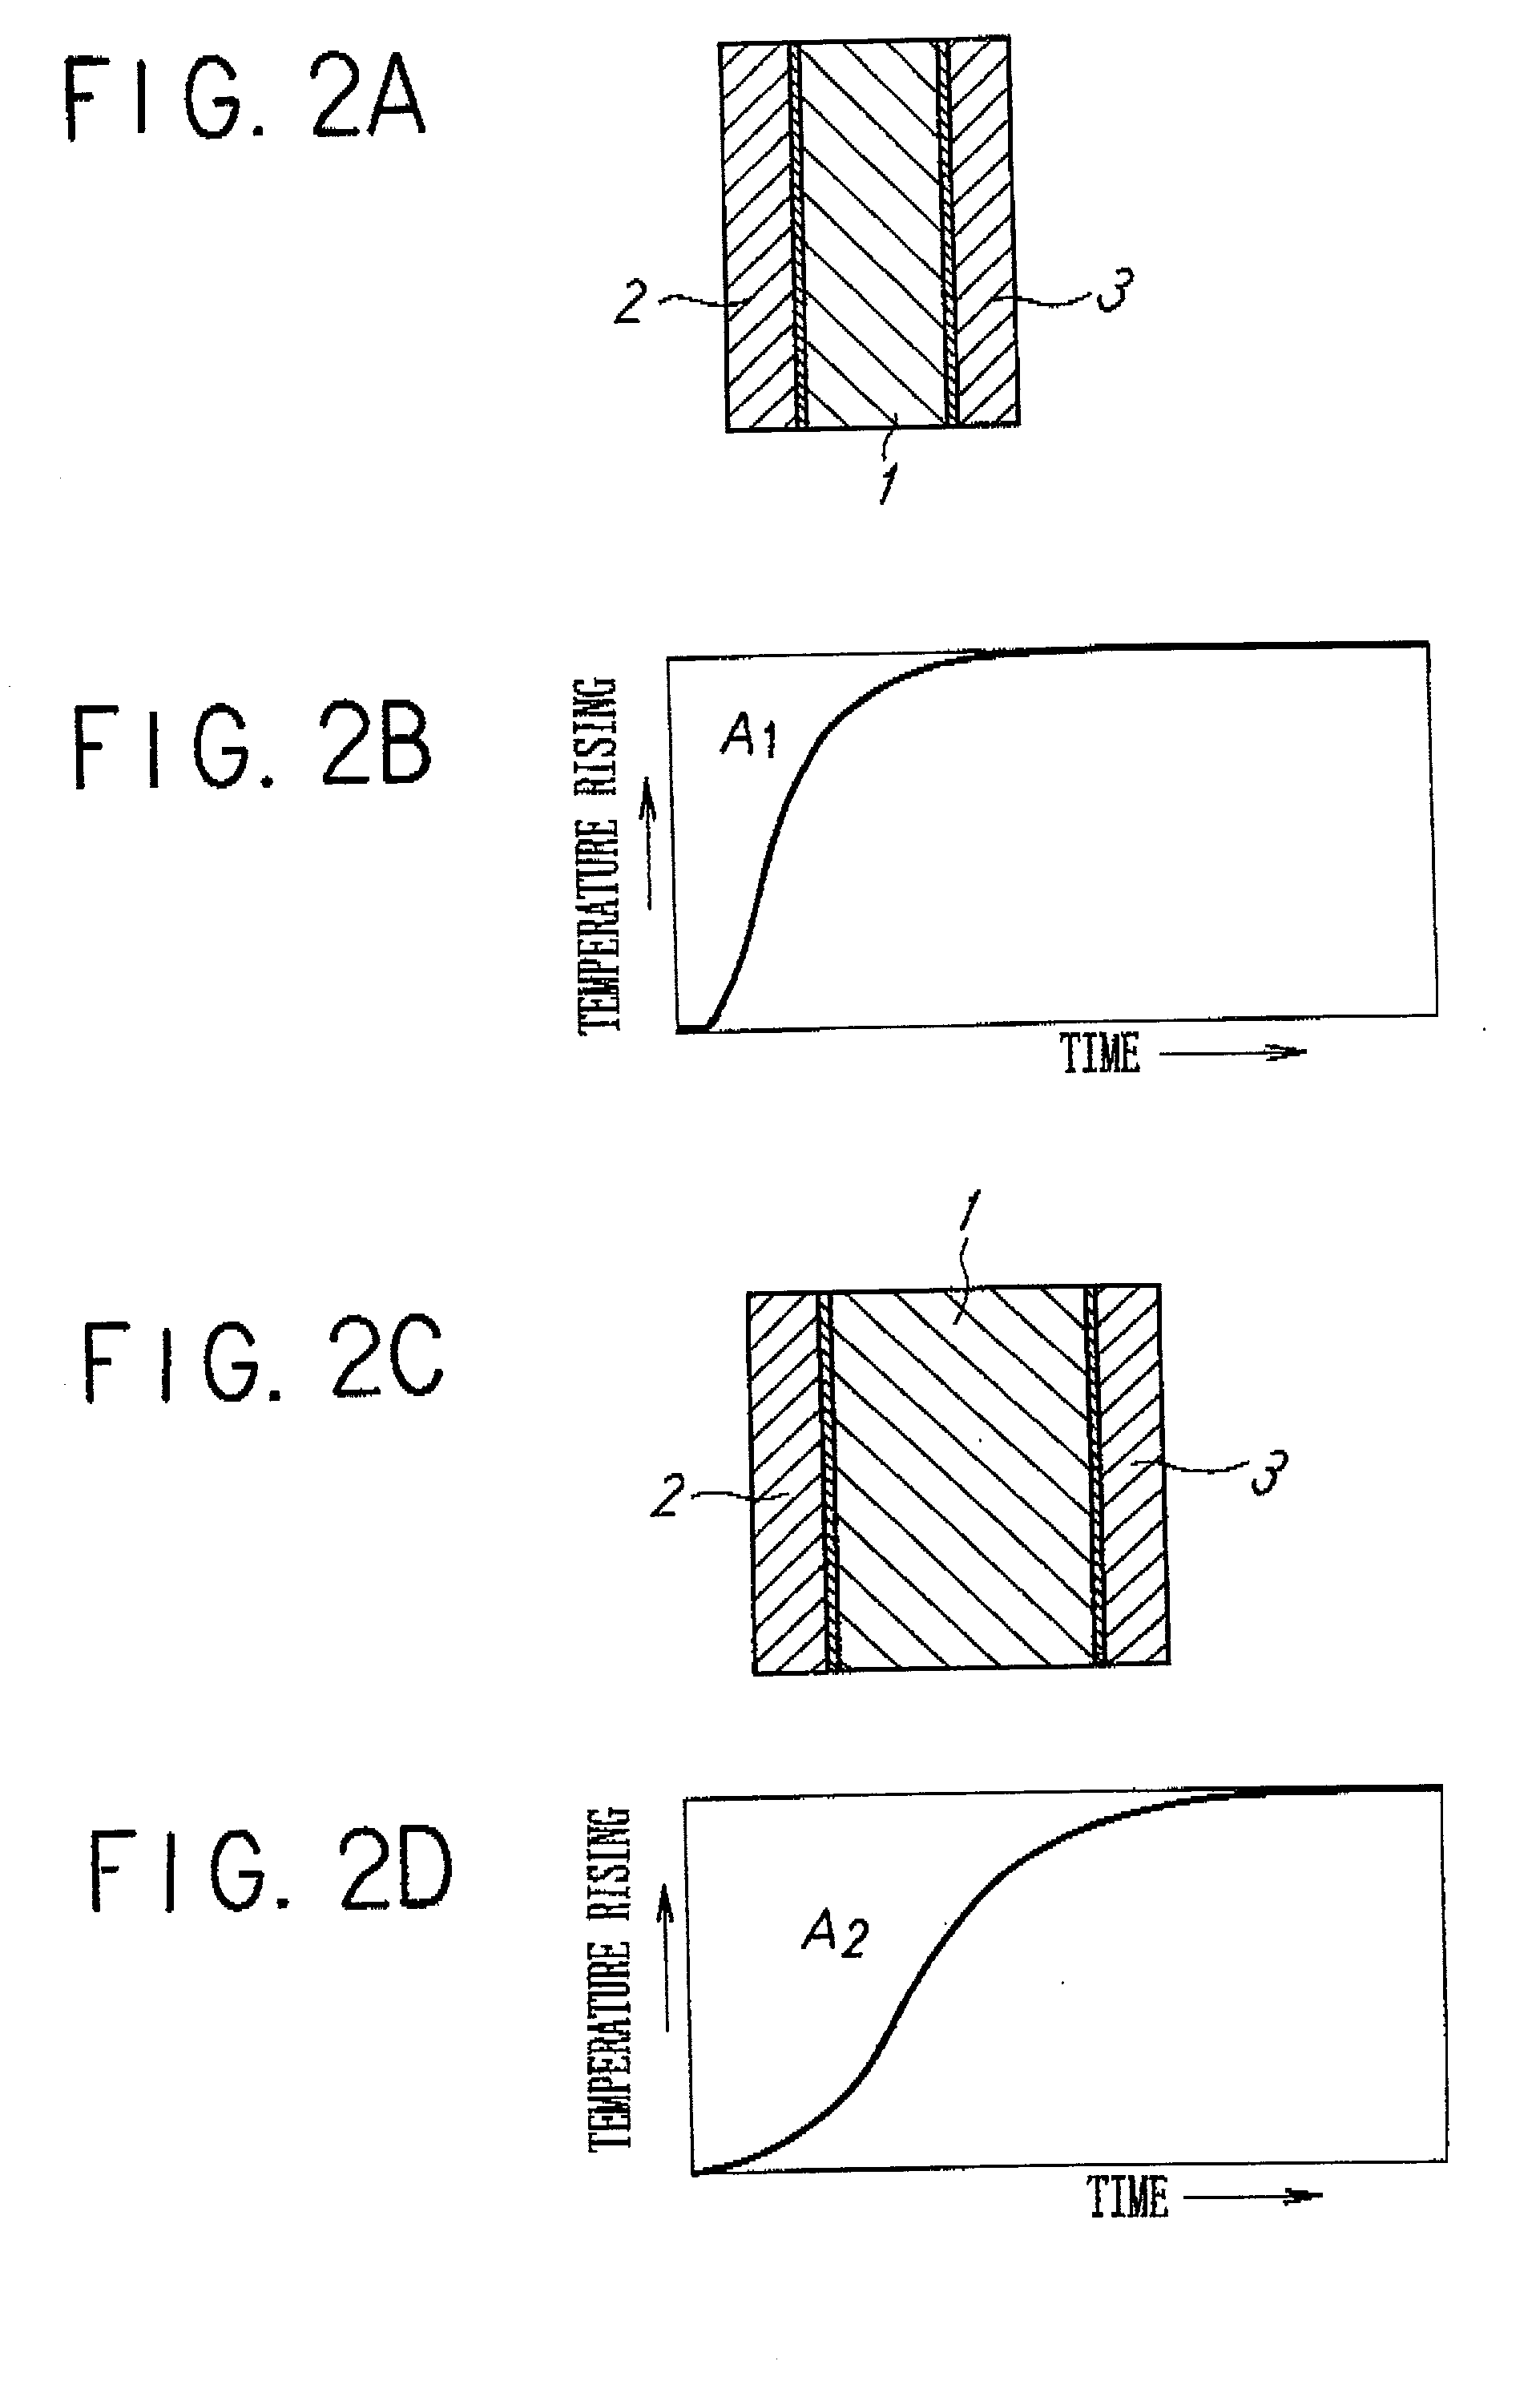 Method for measuring thermal diffusivity and interface thermal resistance